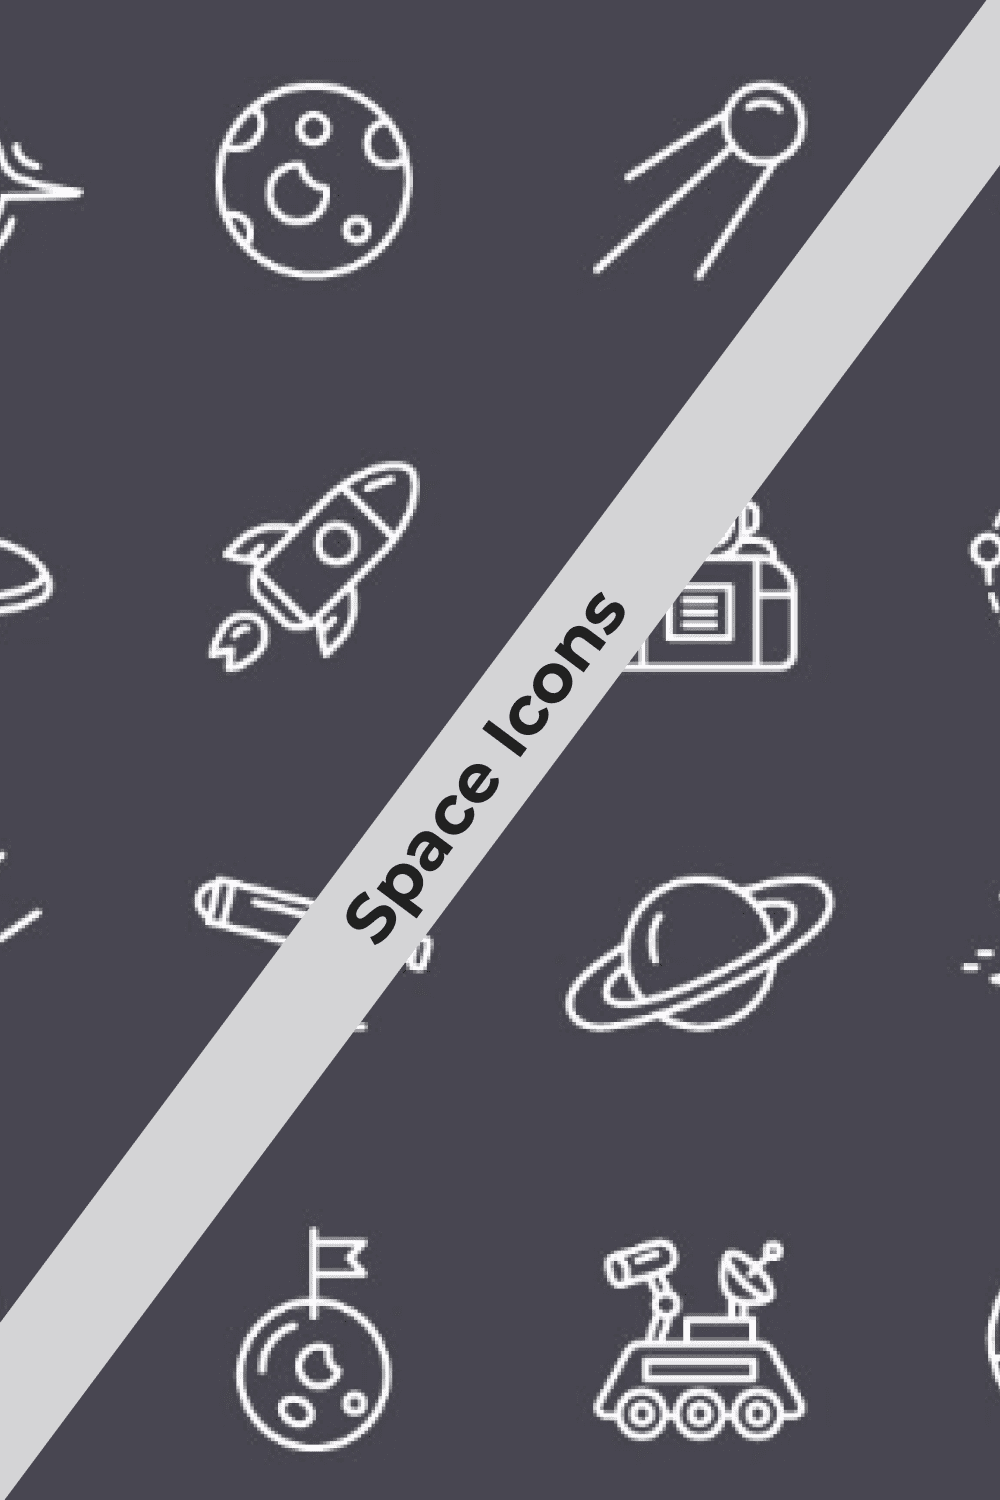 Space Icons - Pintererest.